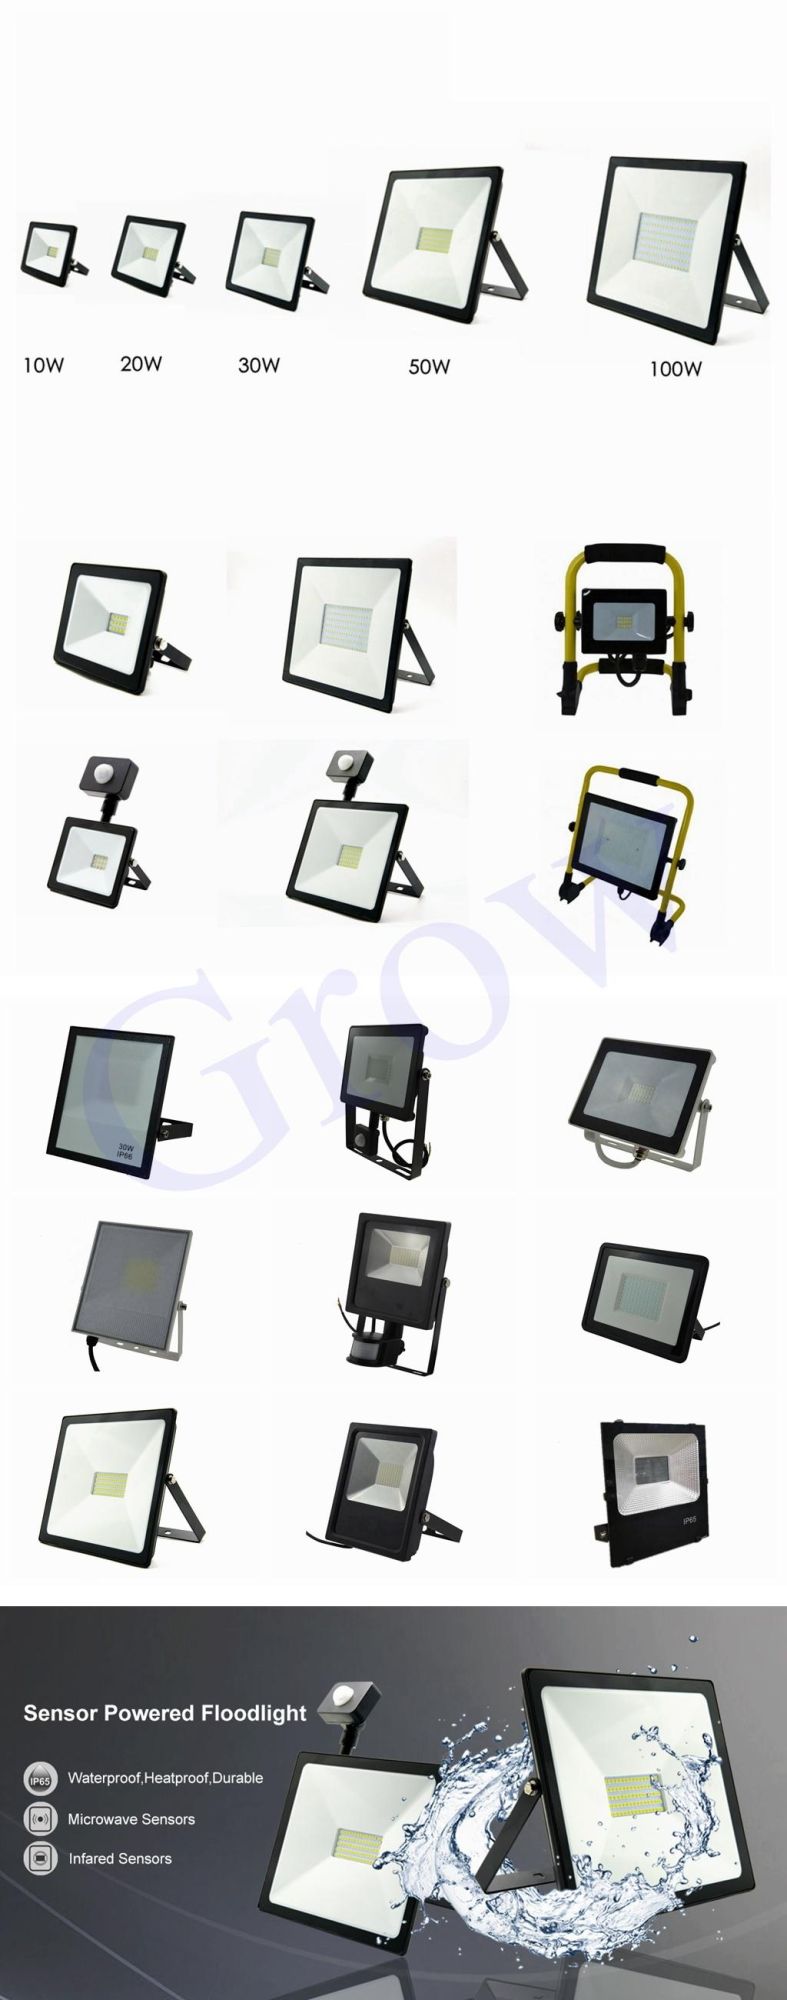 Factory Direct LED Flood Light 300W High Power High Brightness LED Floodlight for Outdoor Work Energy Saving Slim Flood Light with CE RoHS ERP Approval